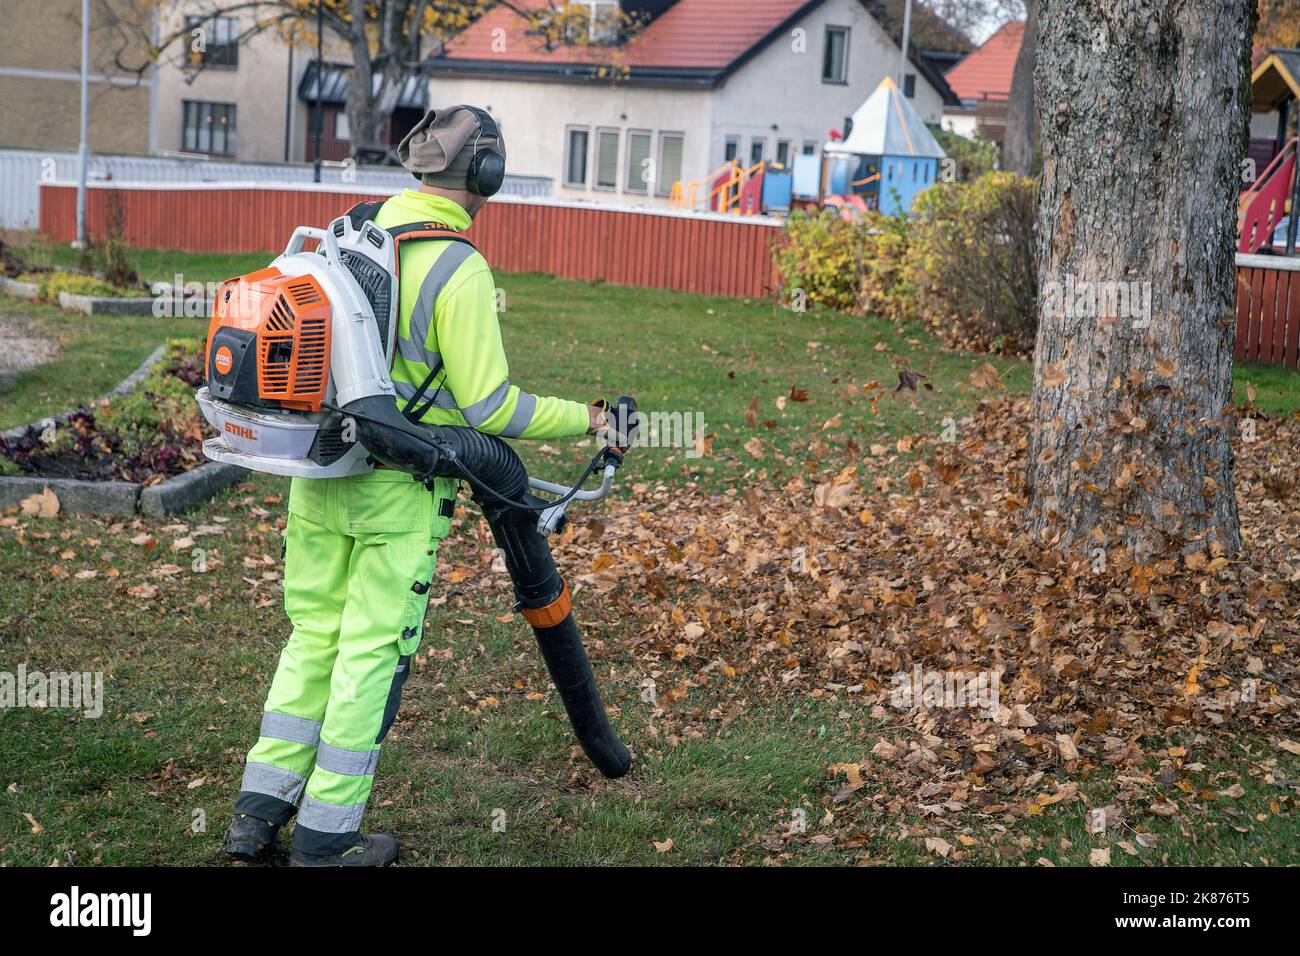 leaf blowing in Malmkoping. removal of autumn leaves in a city park, Stock Photo